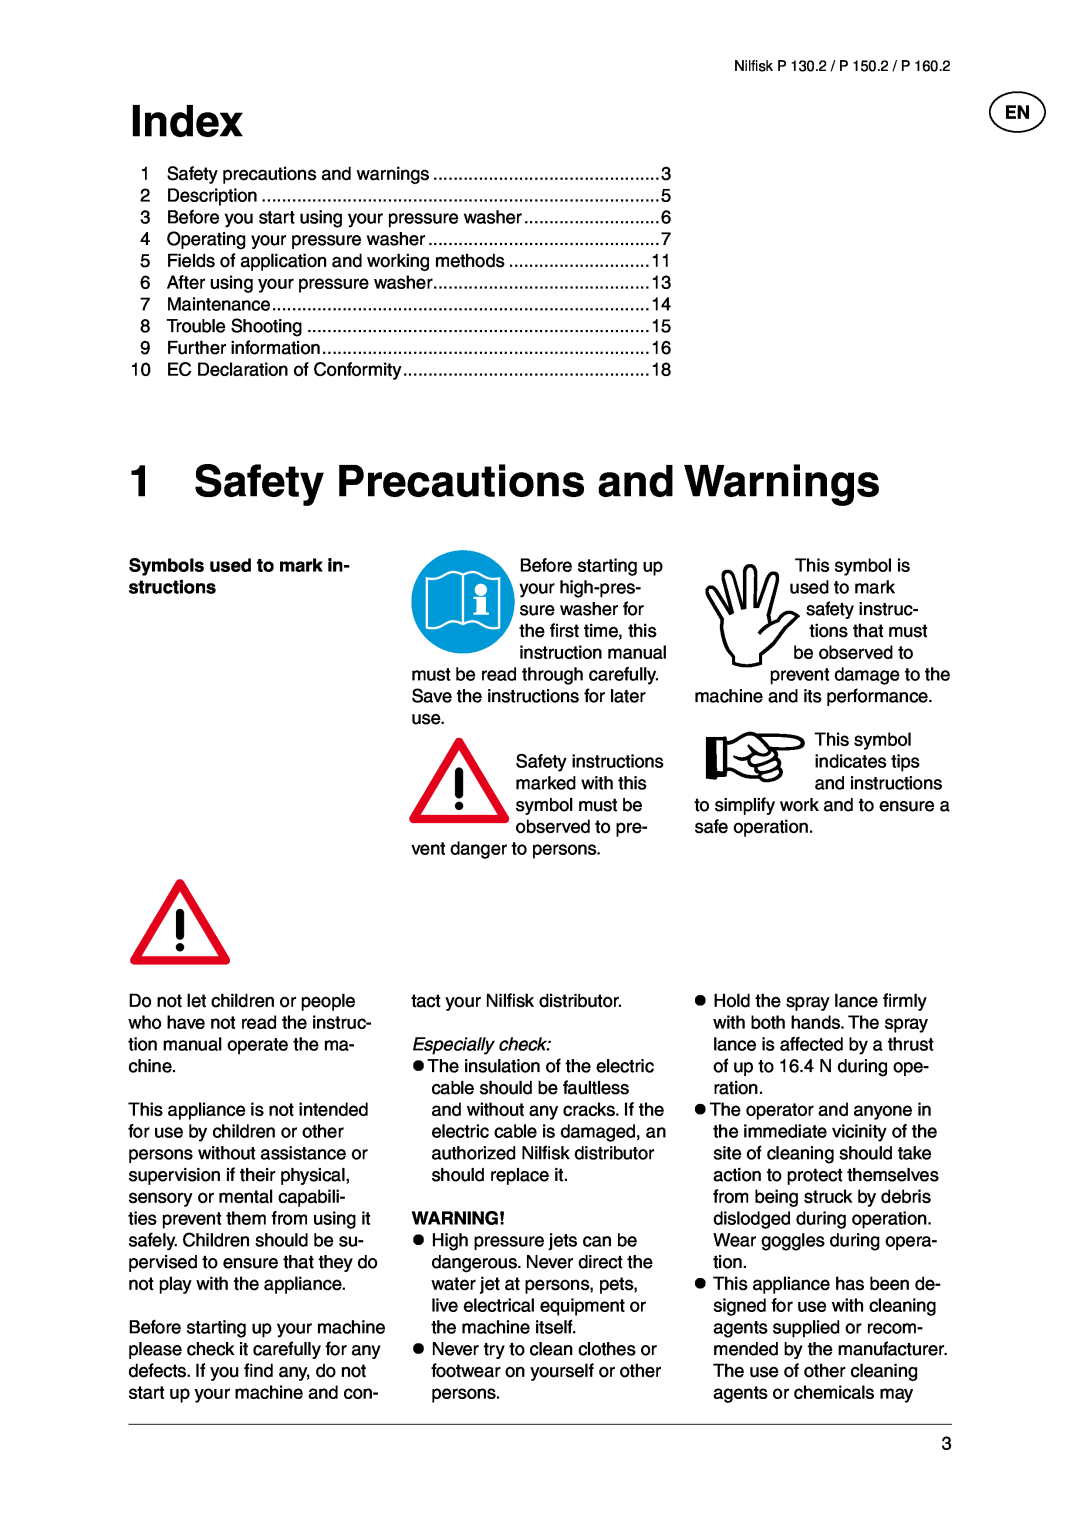 Nilfisk-Advance America P 130.2, P 160.2 Index, Safety Precautions and Warnings, Symbols used to mark in, structions 